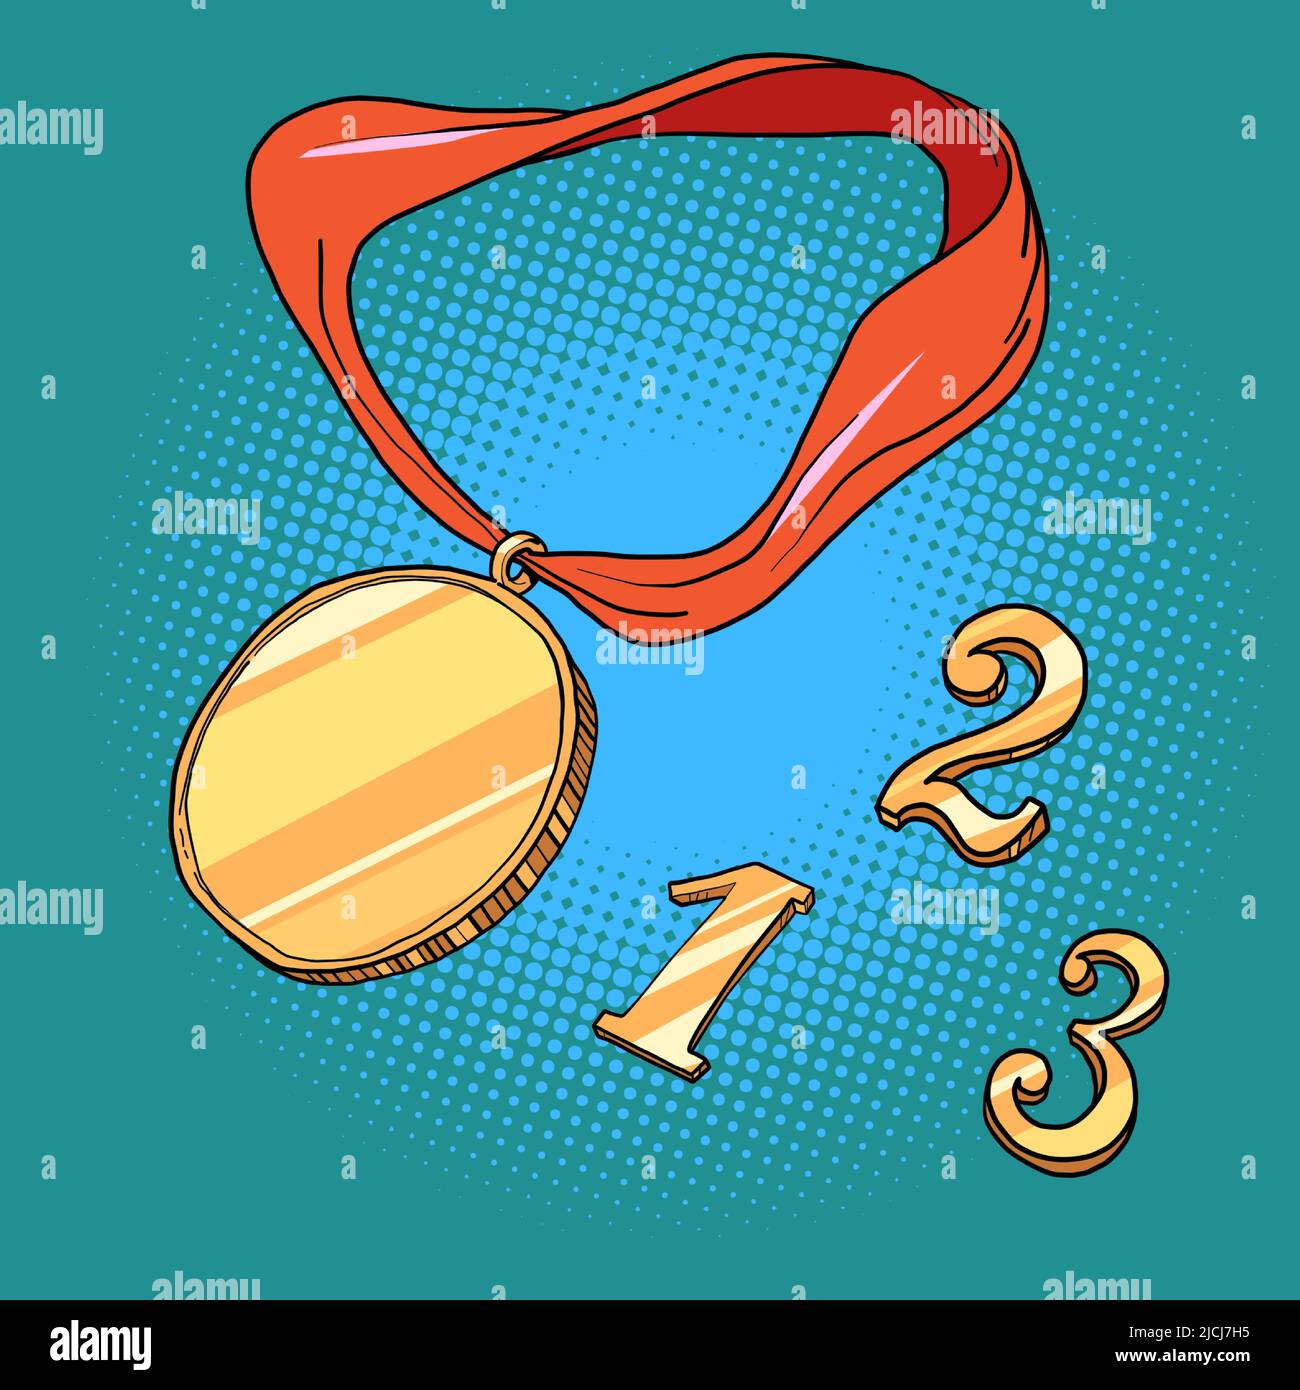 sports prize medal first second and third place 1 2 3 gold silver bronze Stock Vector